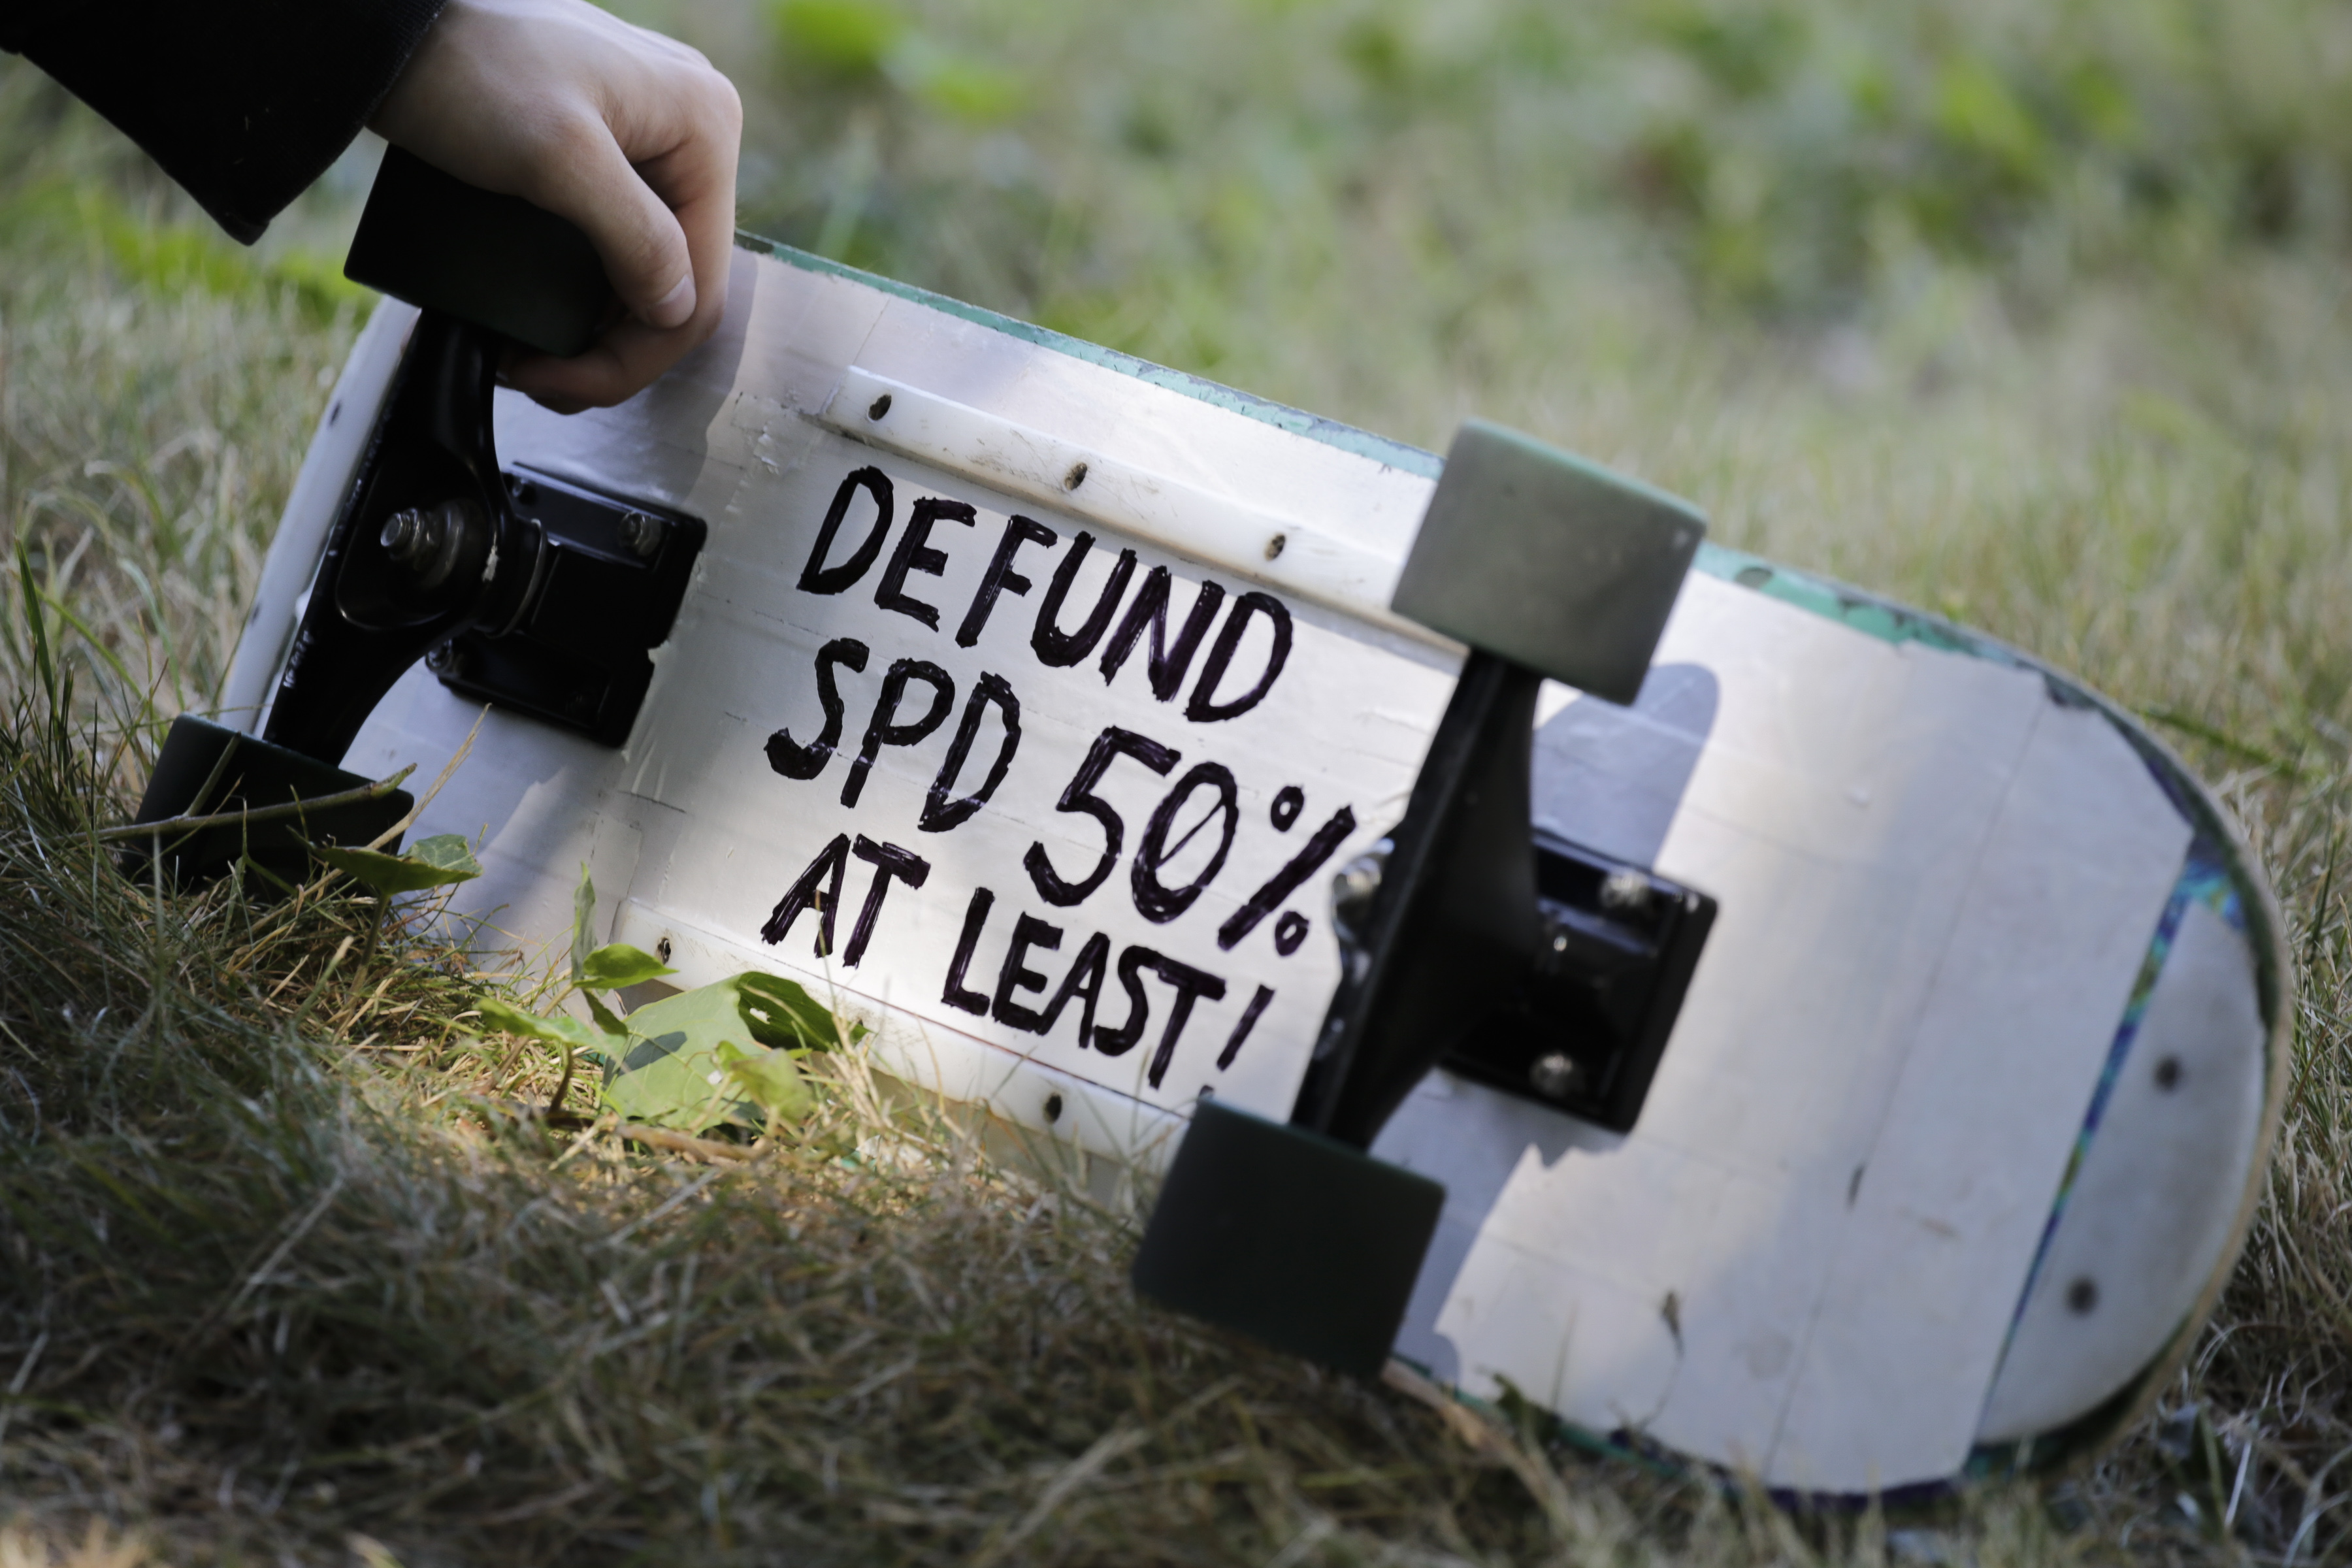 A defund Seattle Police Department (SPD) sign is pictured on a protester's skateboard during a "Defund the Police" march from King County Youth Jail to City Hall in Seattle, Washington on August 5, 2020. (Photo by Jason Redmond / AFP) (Photo by JASON REDMOND/AFP via Getty Images)